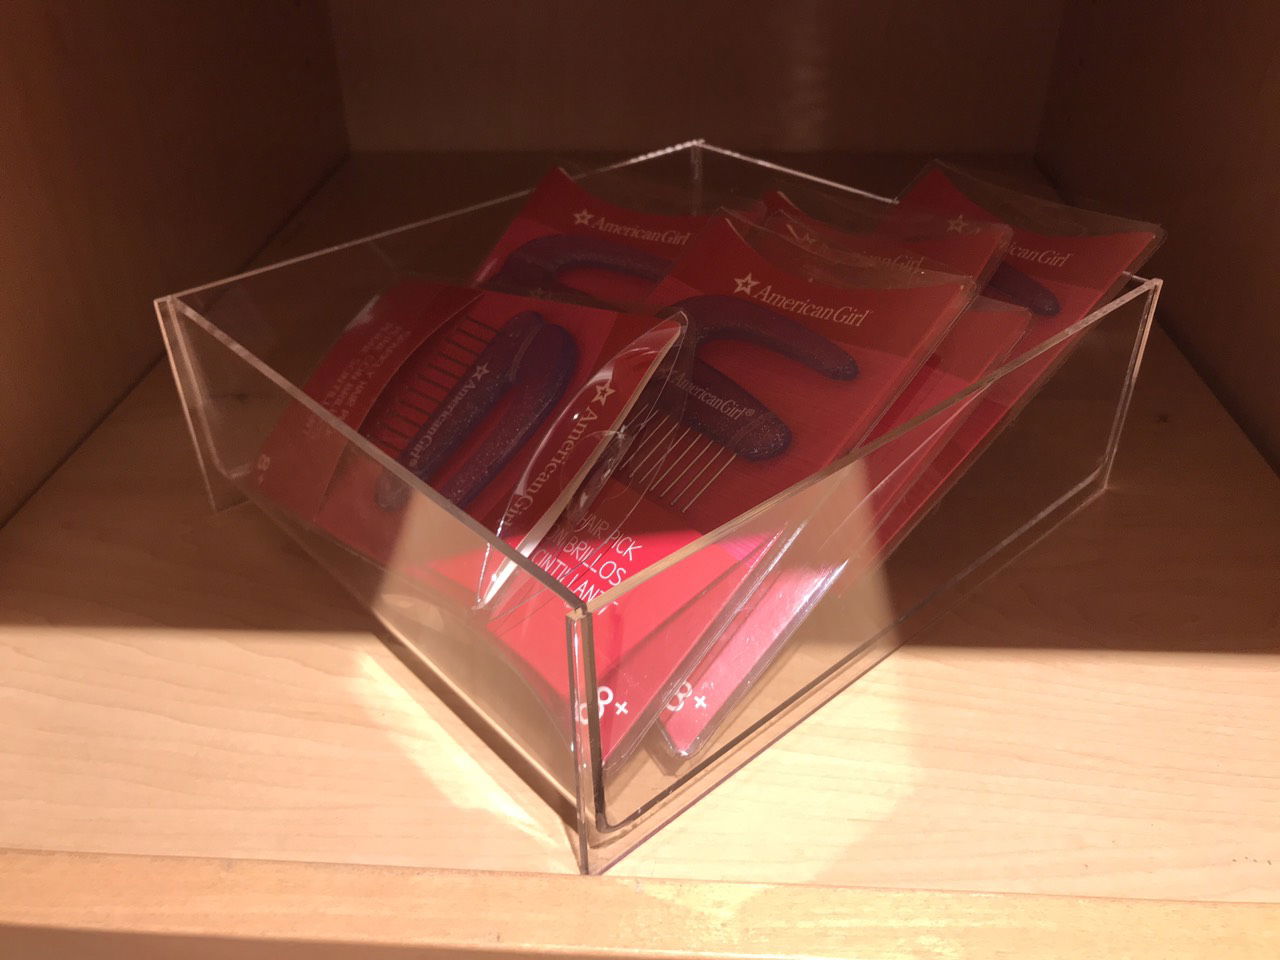 Economical Acrylic Display Tray Made From 1/8 Thick Acrylic